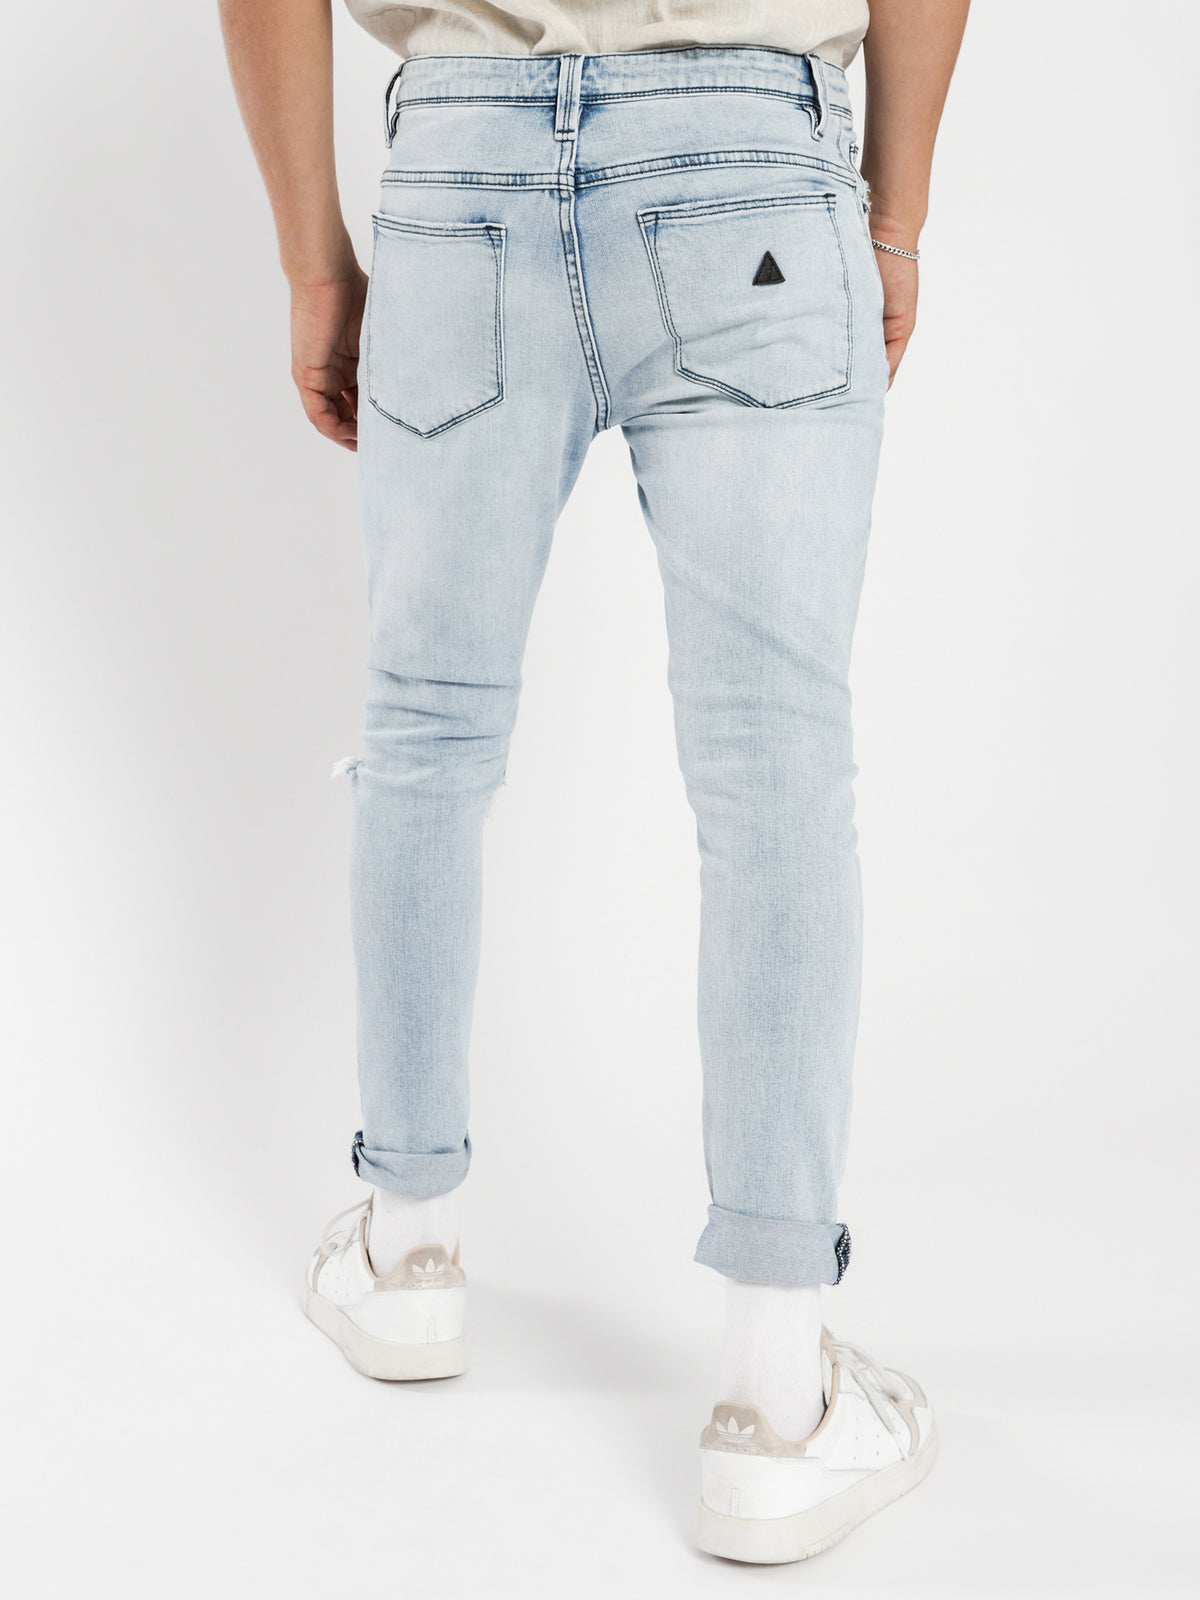 A Dropped Slim Turn Up Jeans Get Shaky Blue Denim